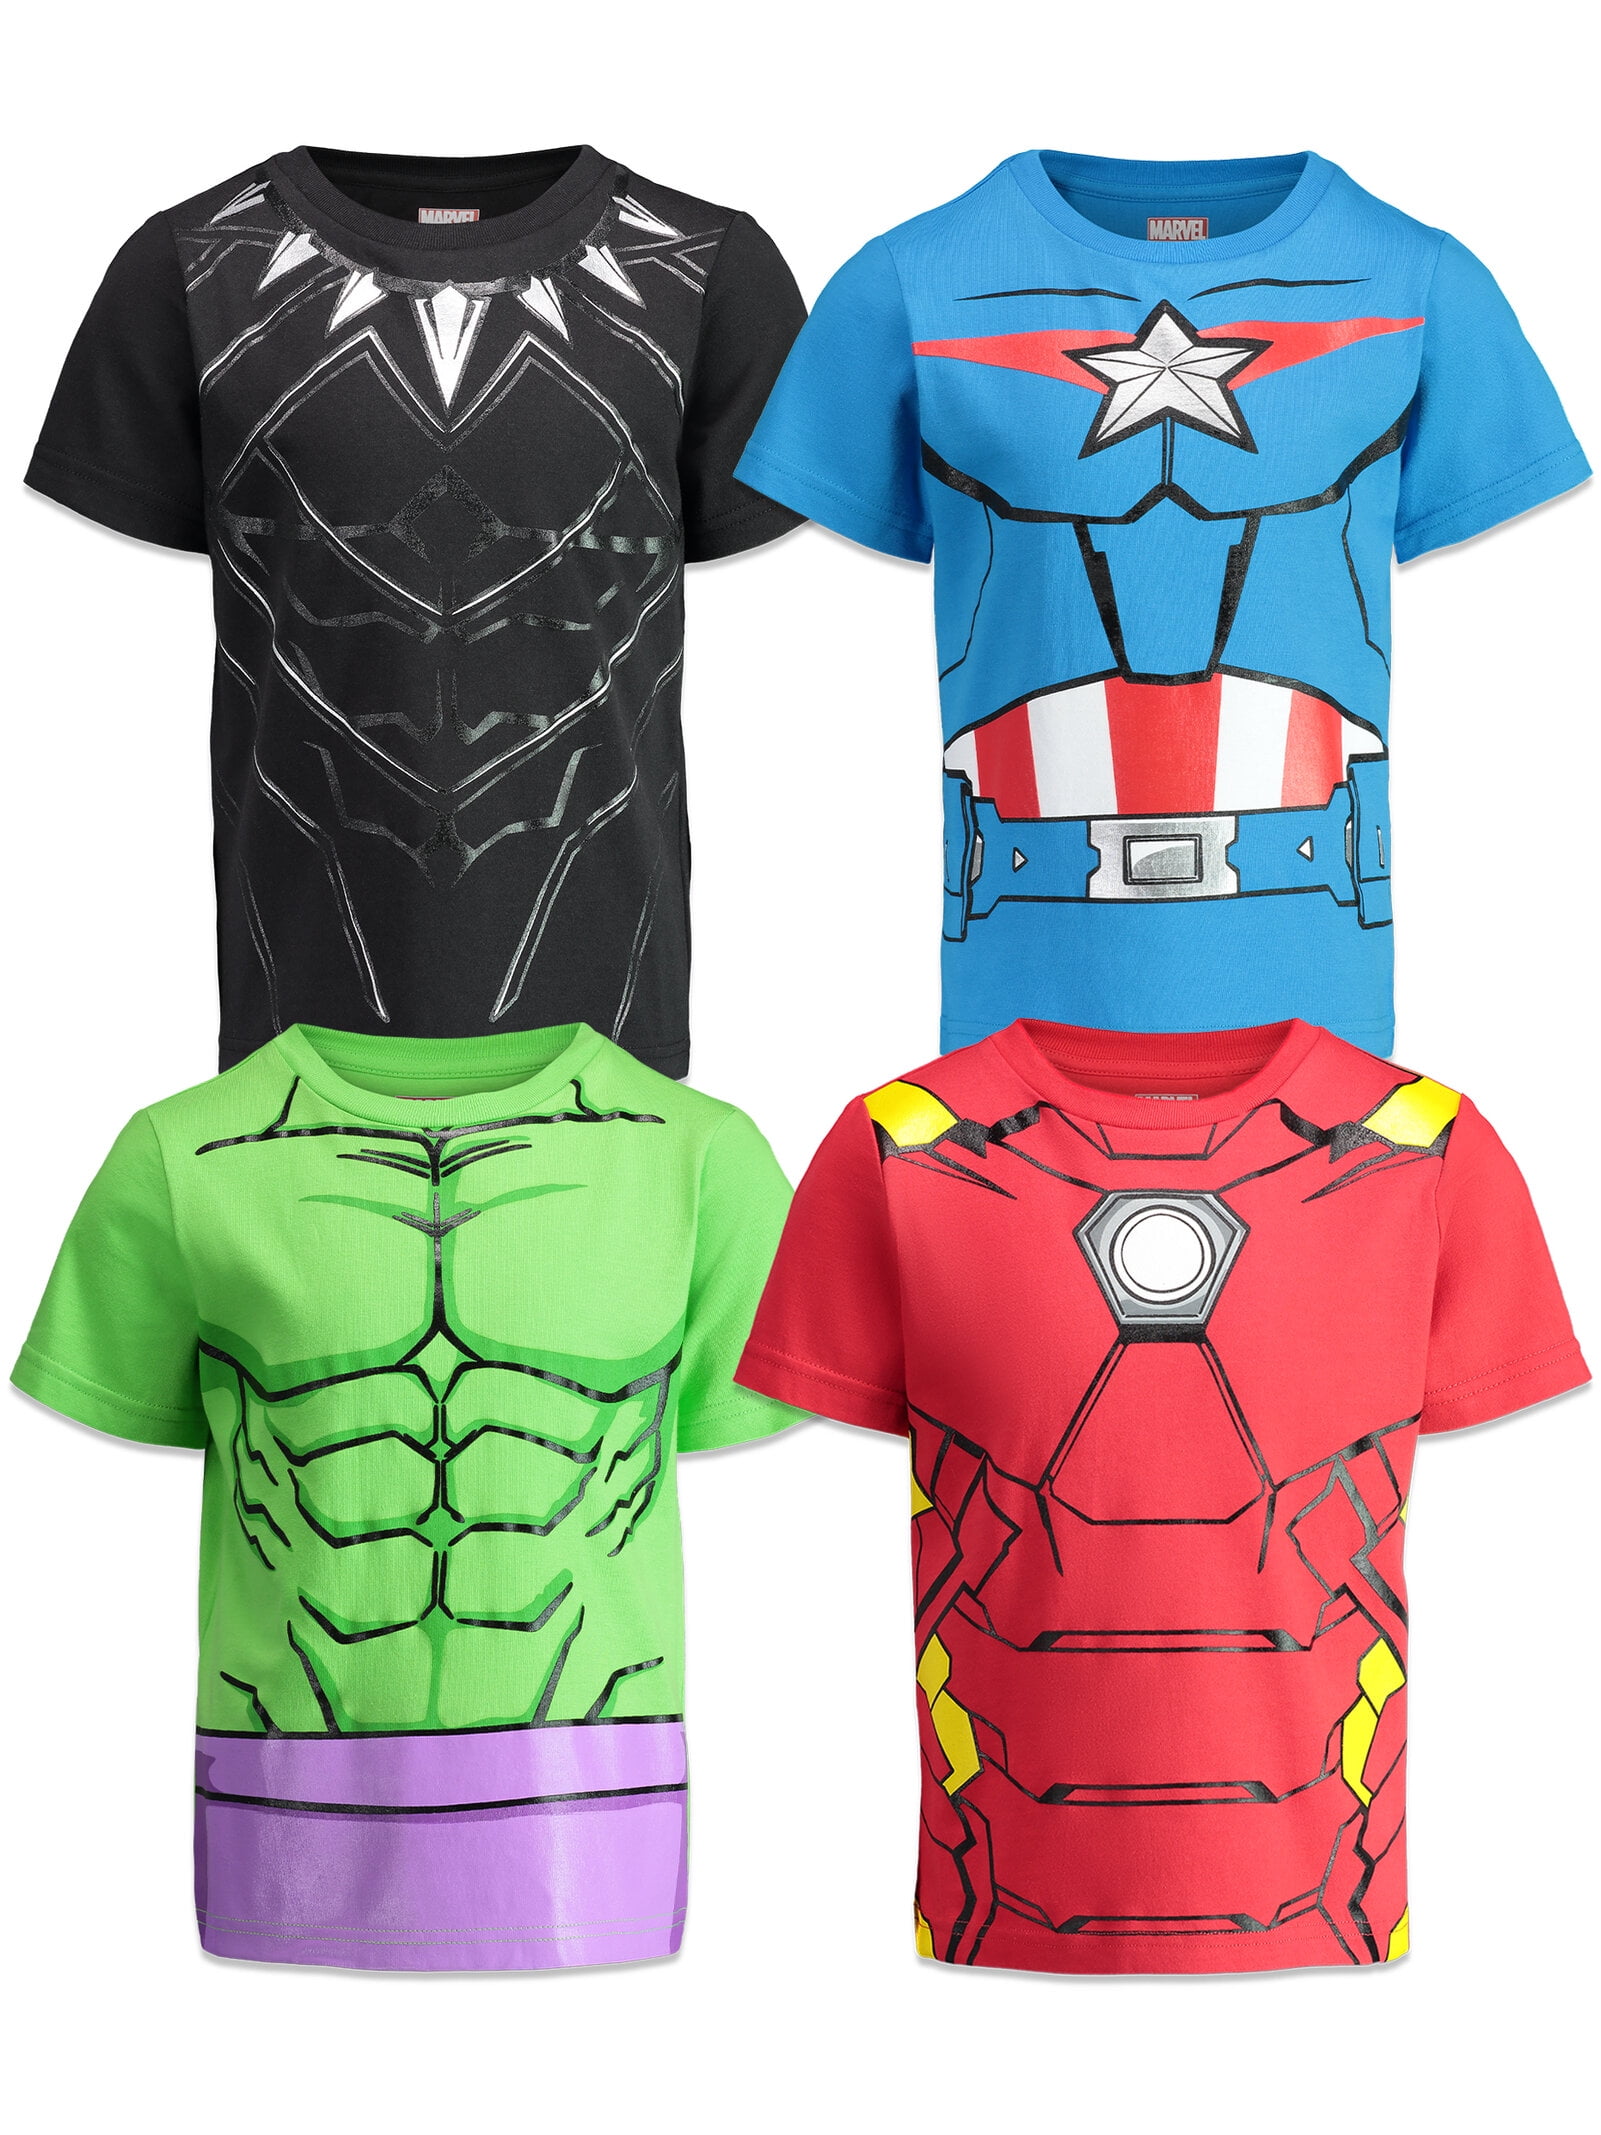 Marvel Avengers Hulk Captain America Black Panther Graphic T-Shirt and Shorts Outfit Set Toddler to Big Kid 